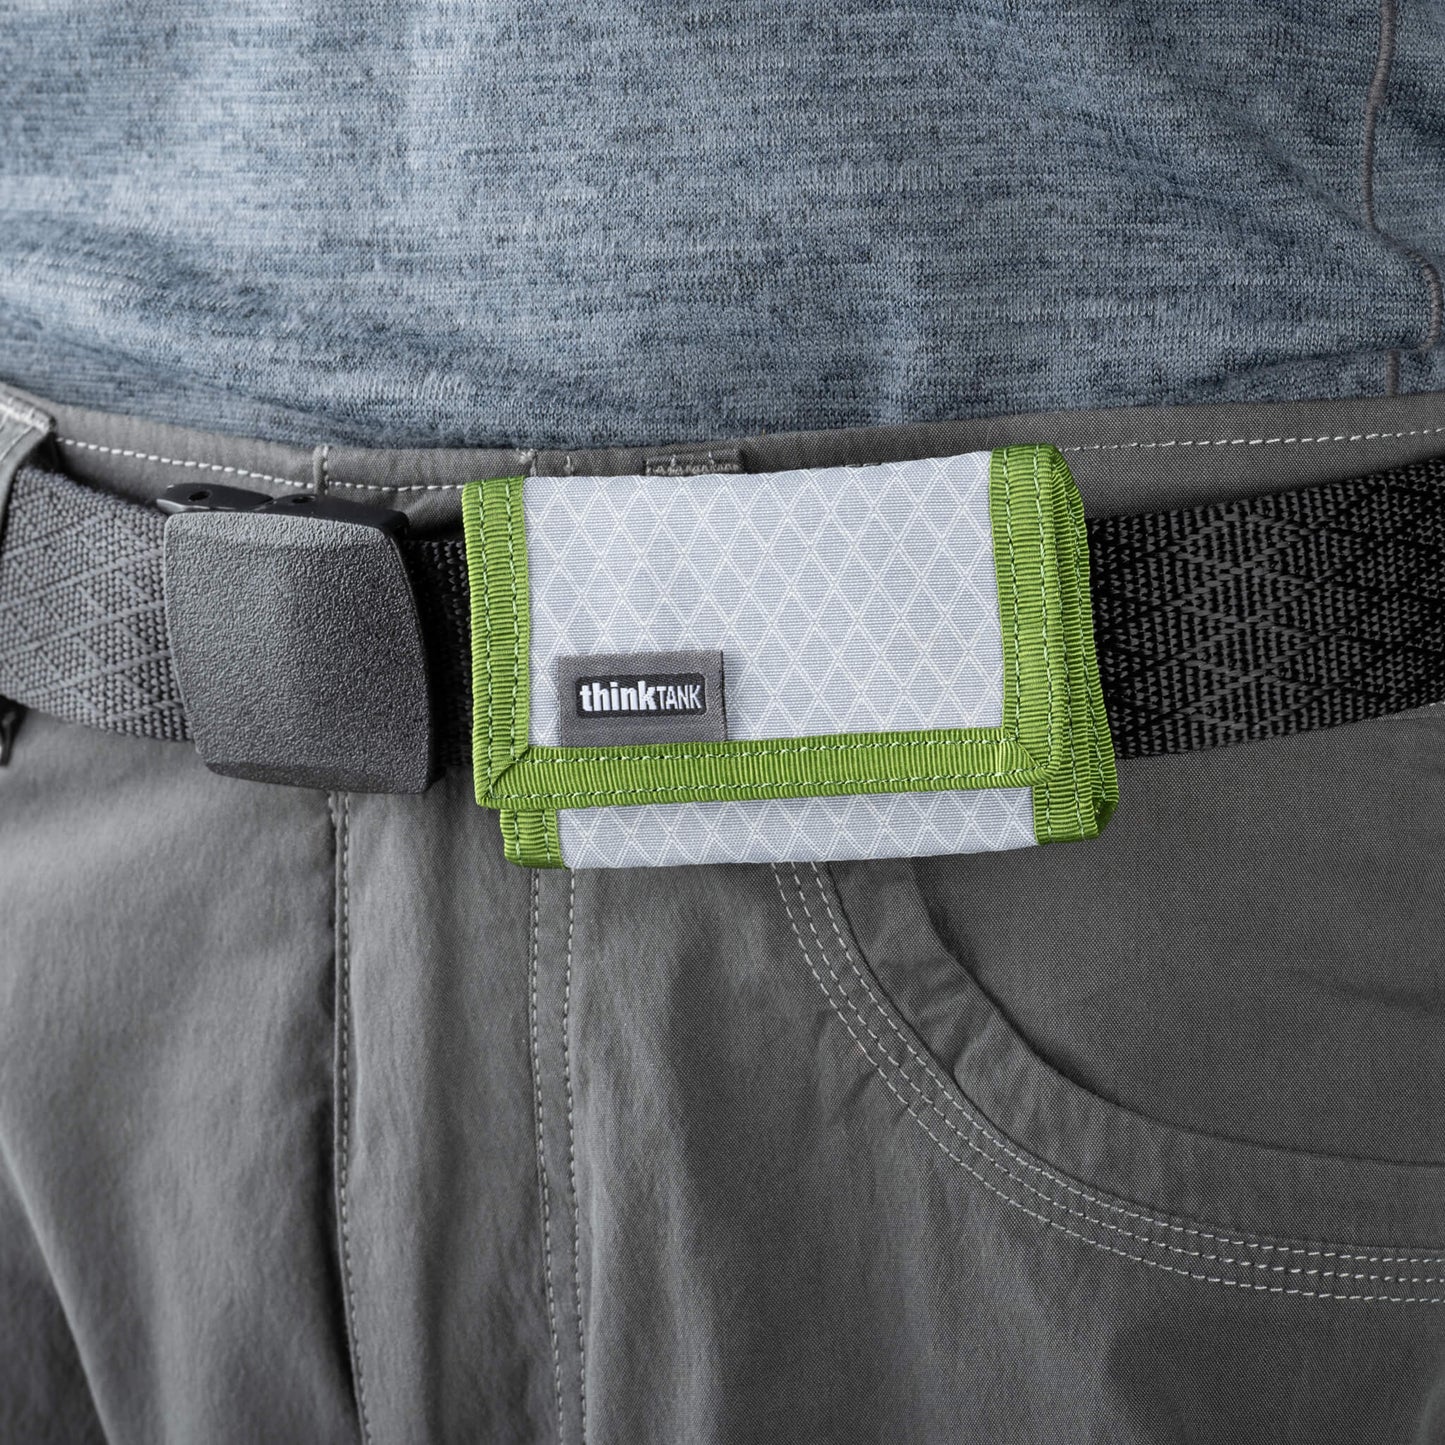 
                  
                    Fits easily in your pocket or attaches to your belt or bags
                  
                